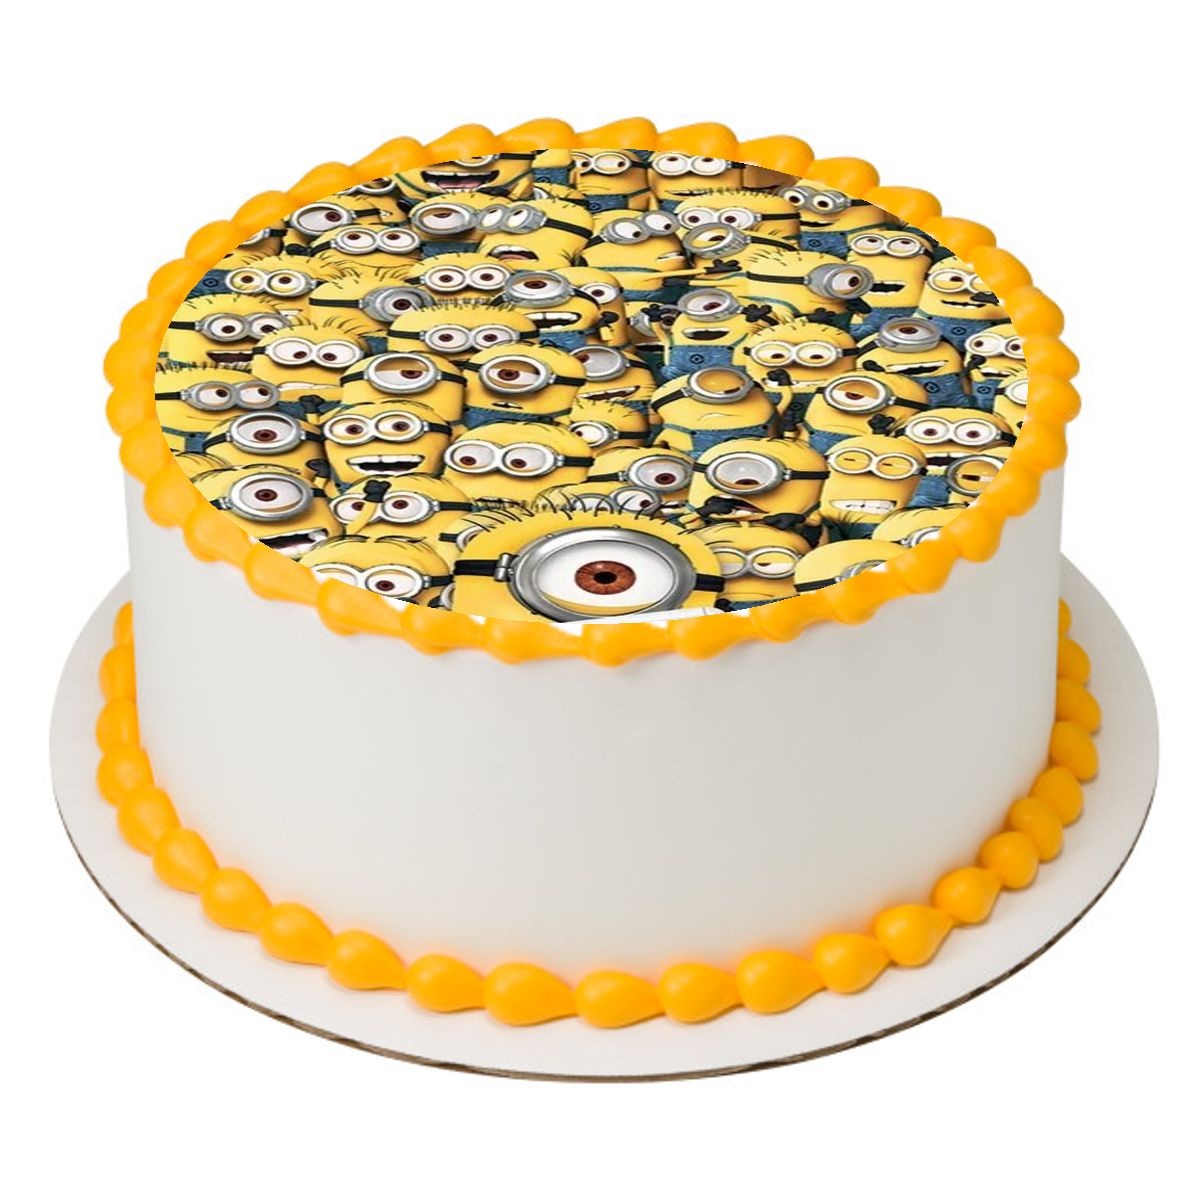 Despicable Me Minions Gru Plan Meme Edible Cake Topper Image ABPID5681 – A  Birthday Place